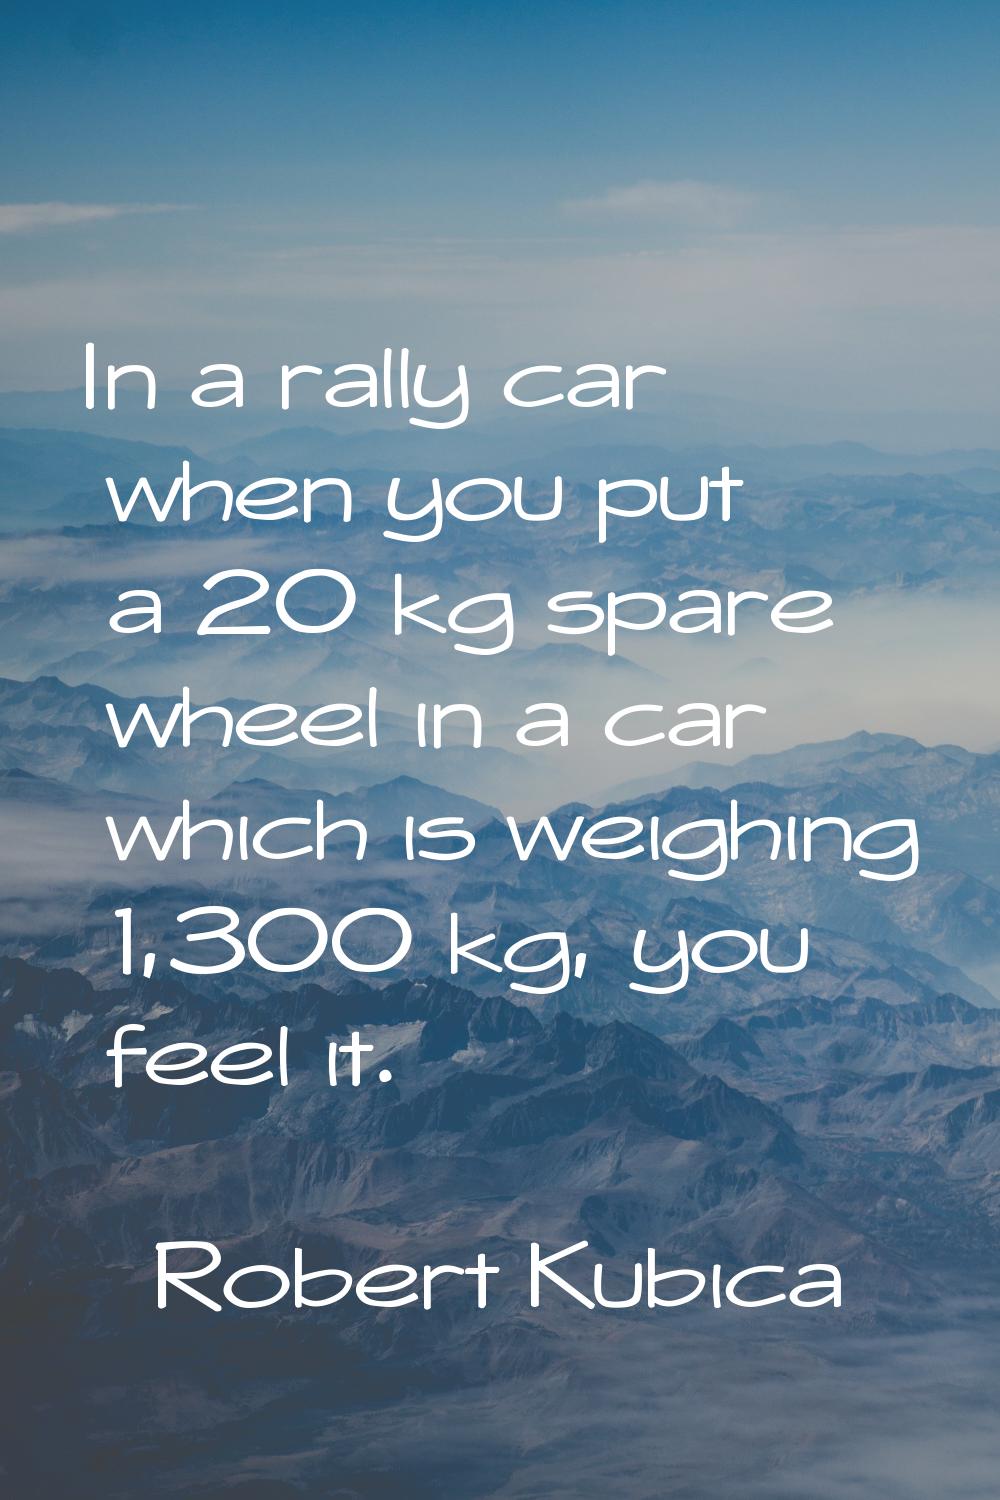 In a rally car when you put a 20 kg spare wheel in a car which is weighing 1,300 kg, you feel it.